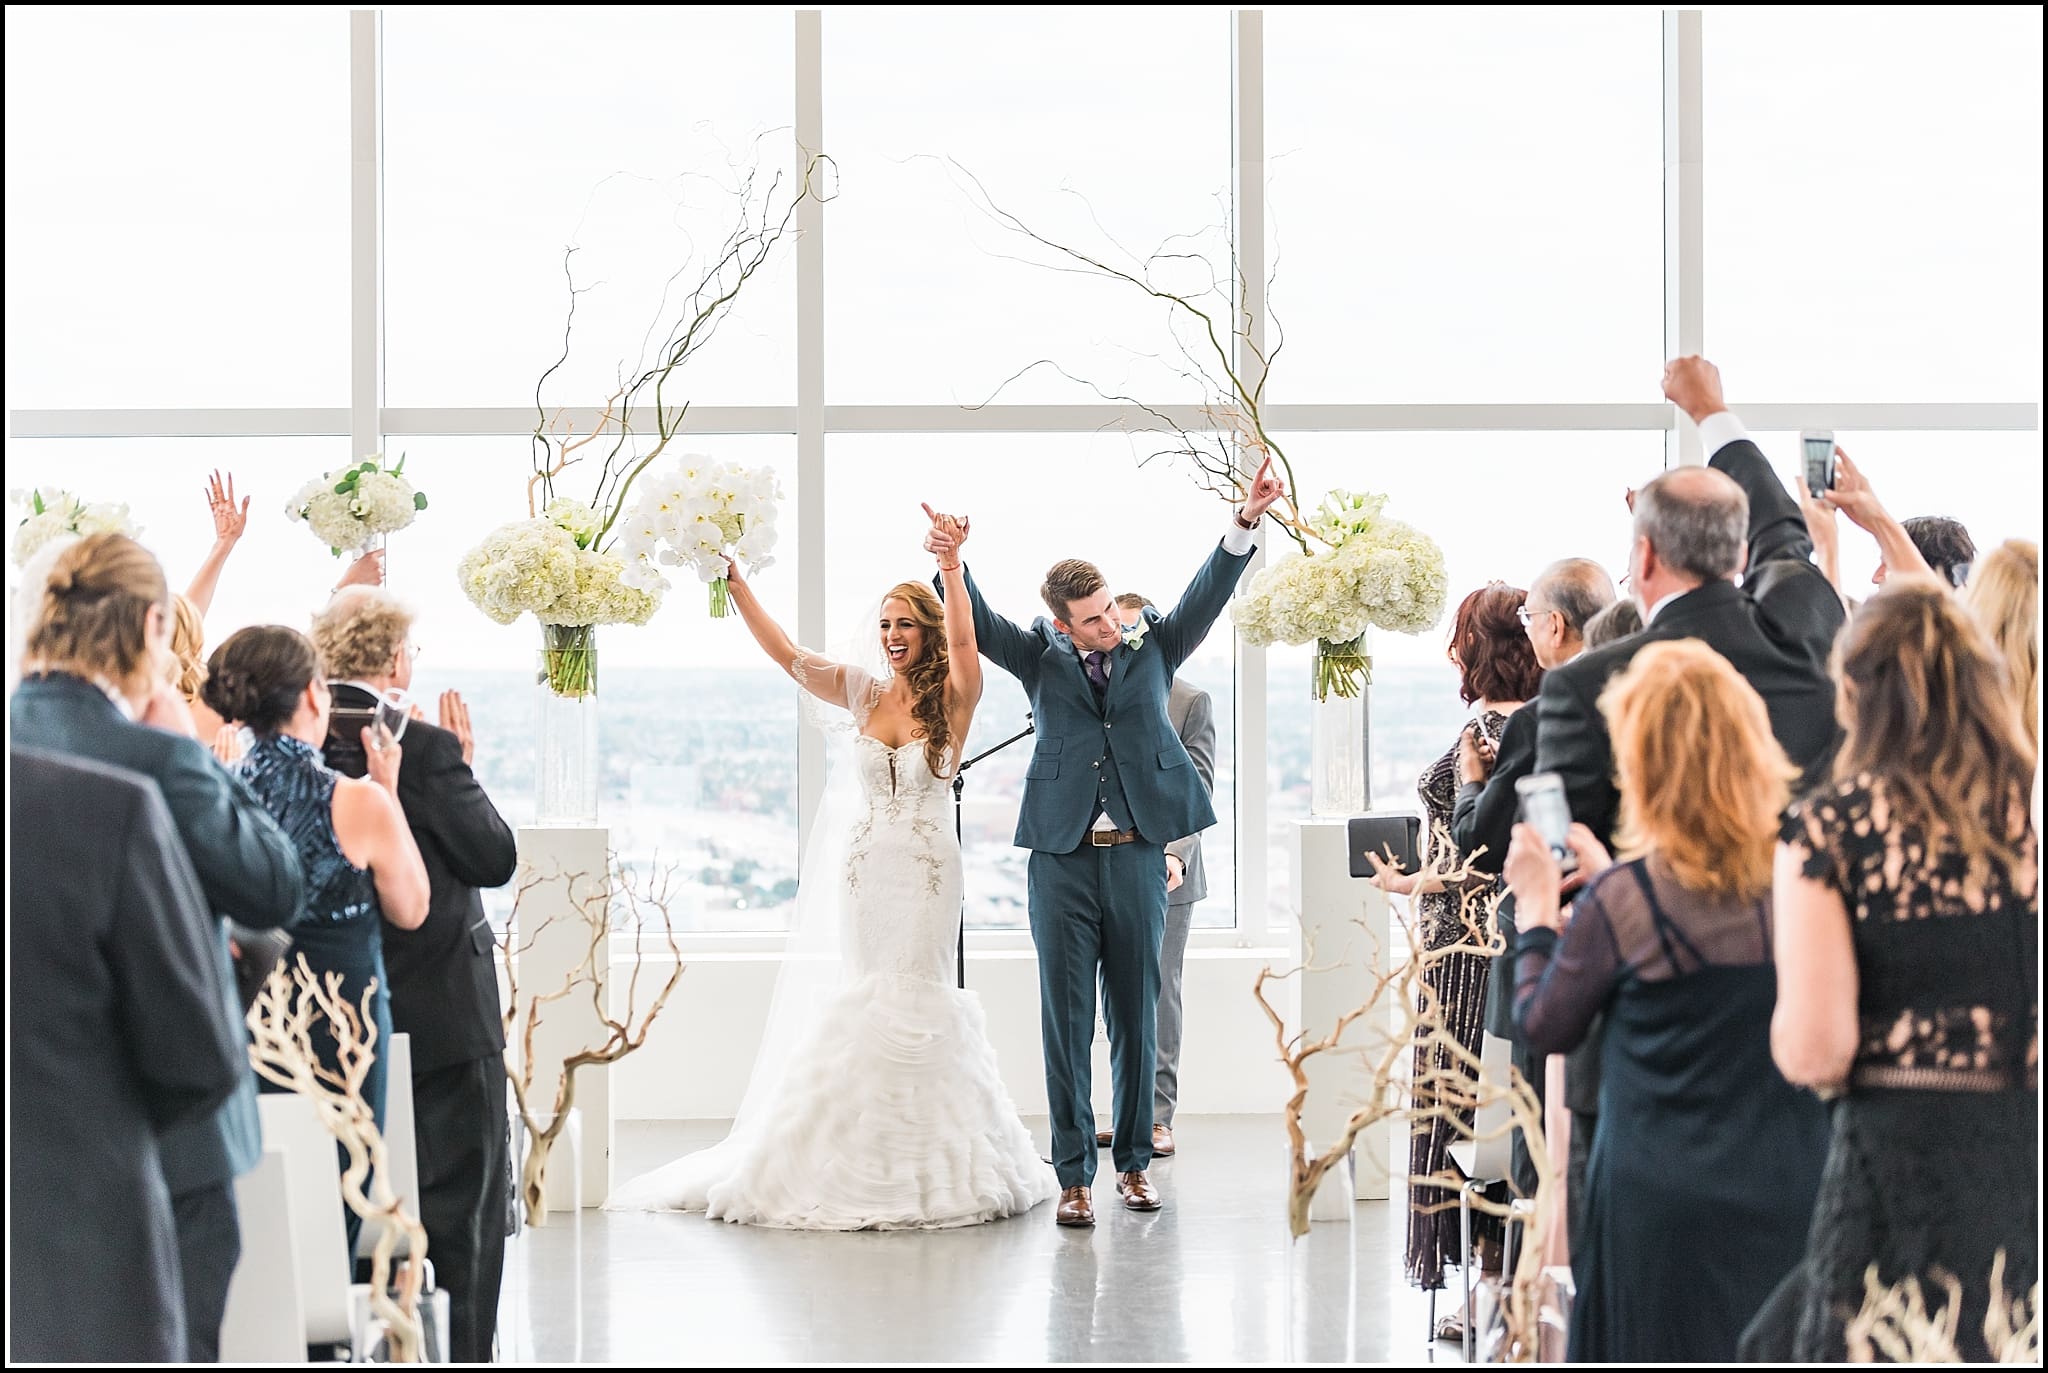  favorite wedding images 2016, wedding photos from 2016, our favorite wedding photos, USC center wedding, AT&T building wedding, DTLA wedding, los angeles wedding